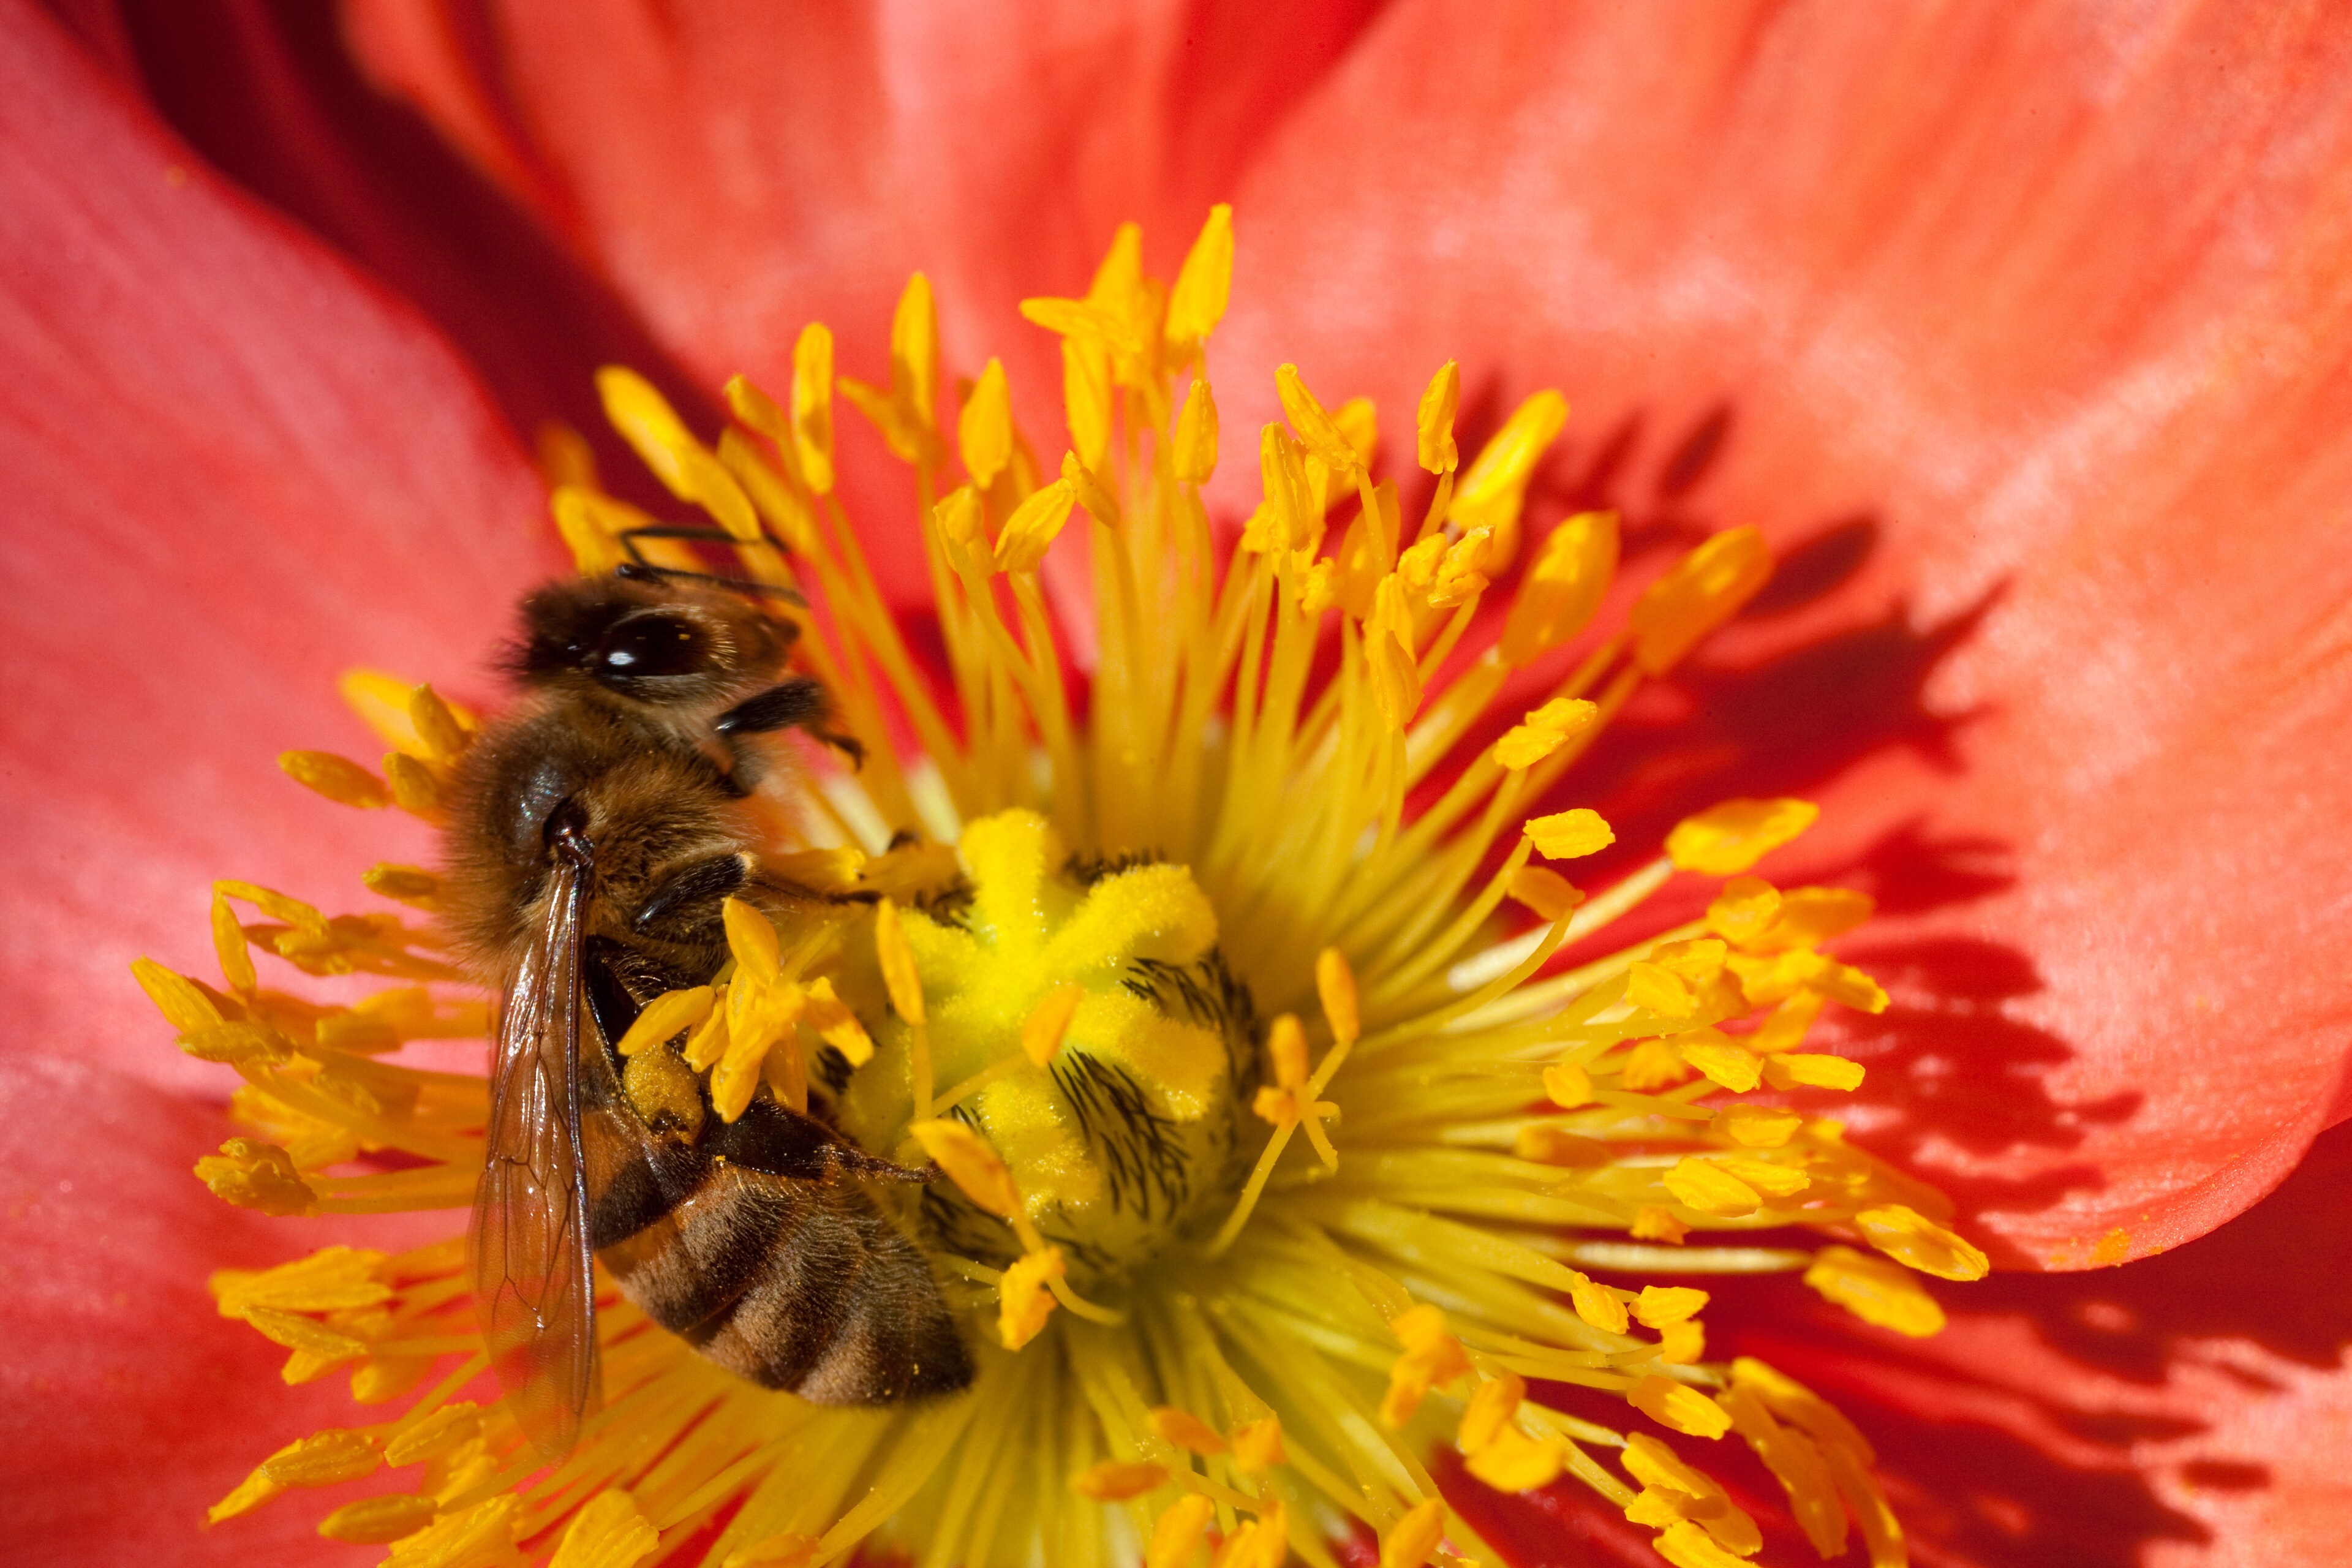 An Africanized Honey Bee (Apis mellifera) hastily collects pollen from an Icelandic poppy.